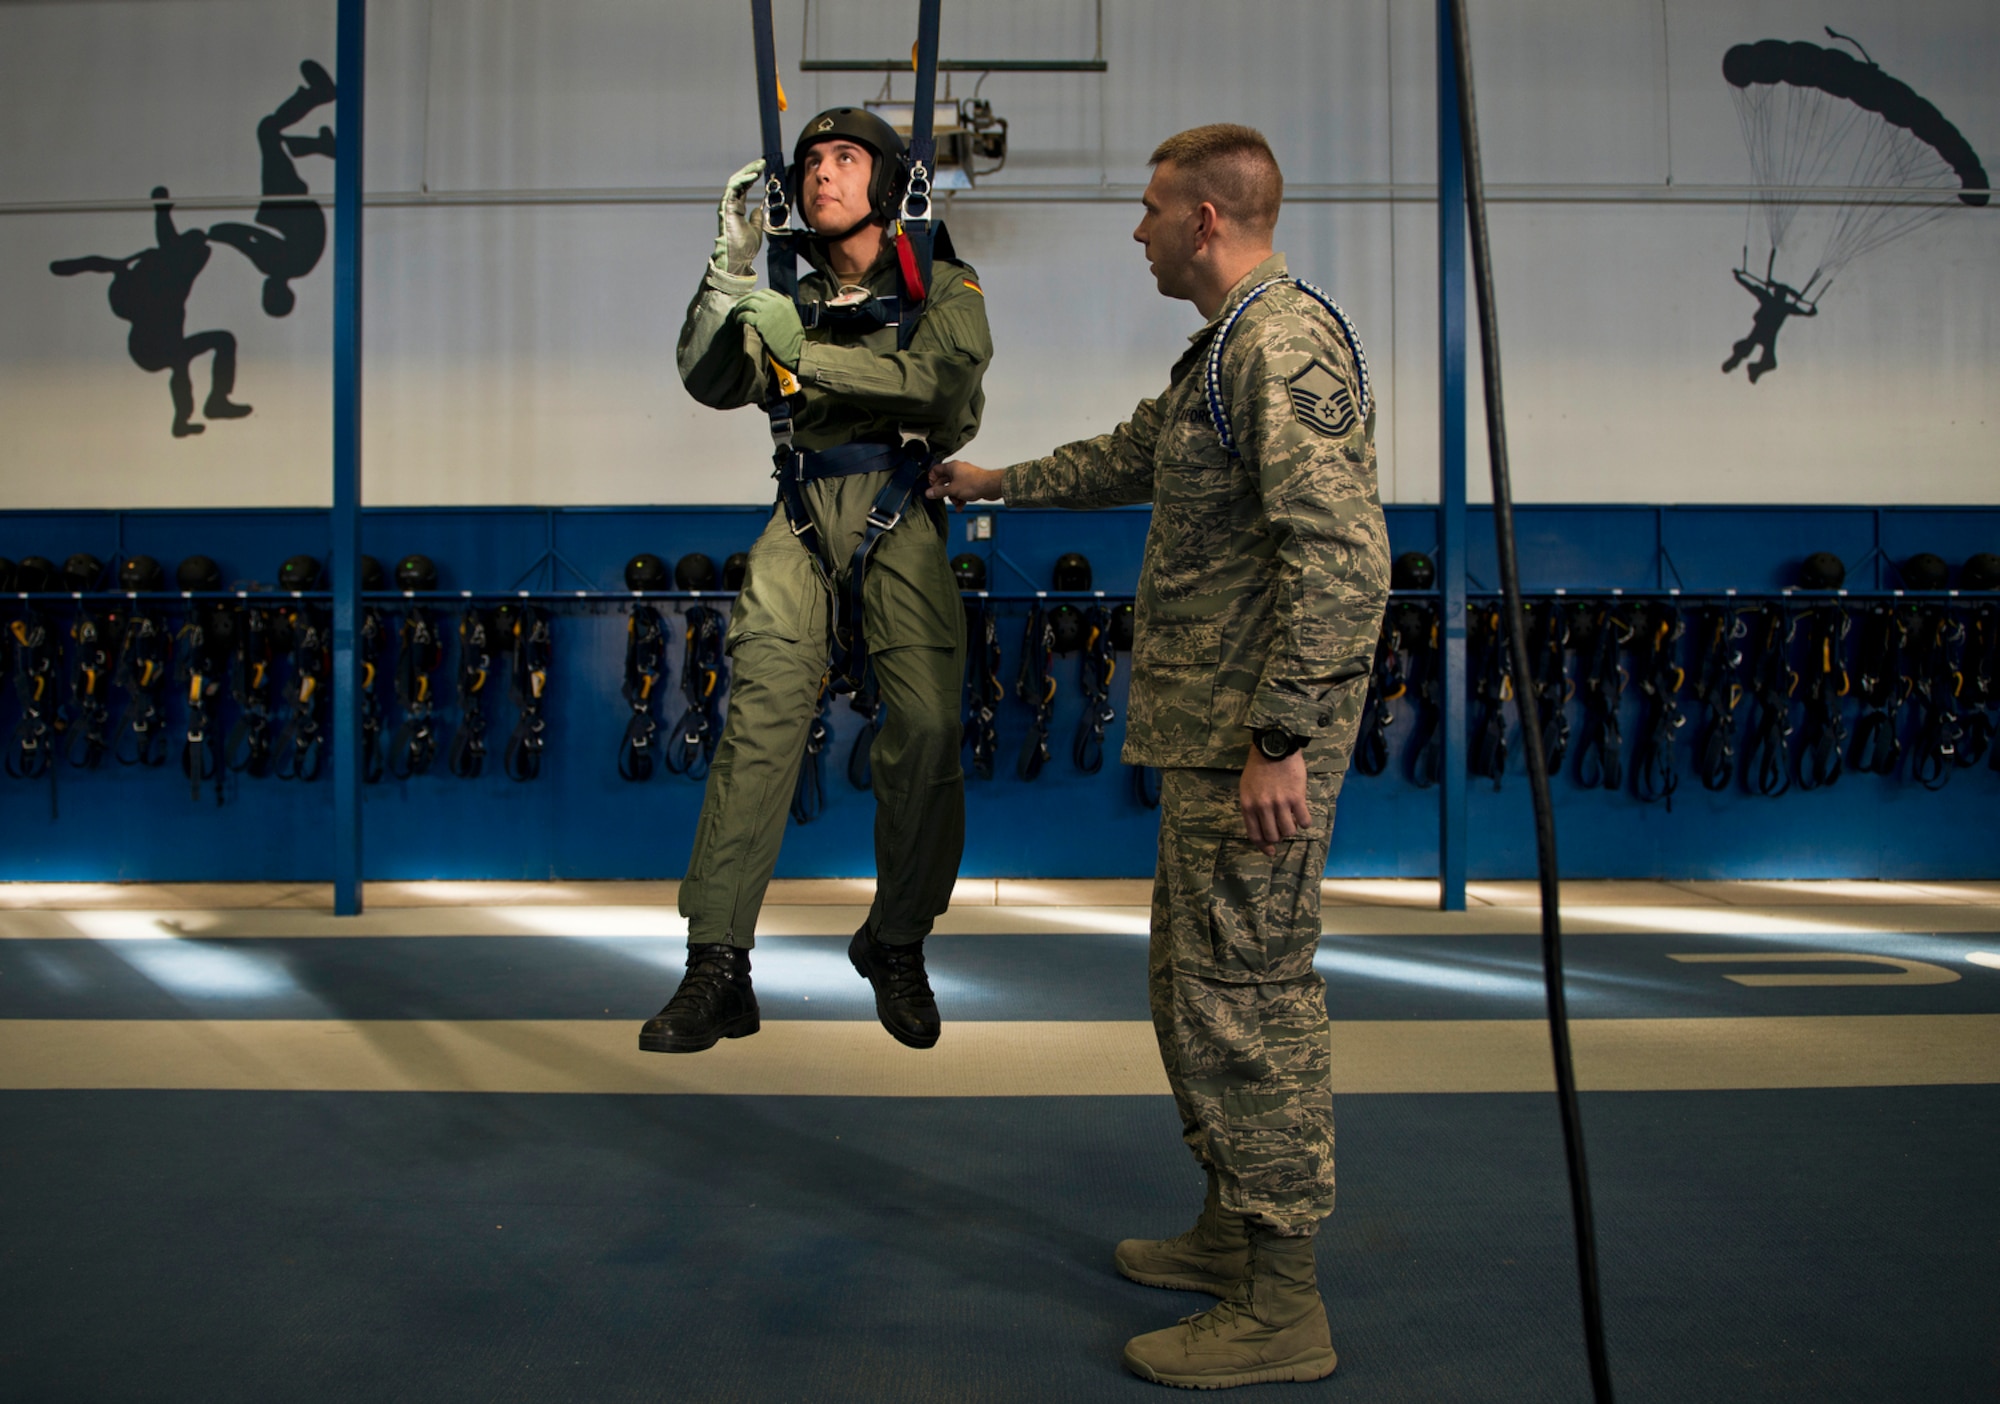 Master Sgt. David Siemiet, a jumpmaster with the Wings of Blue and AM490 instructor, prepares to teach a harnessed U.S. Air Force Academy International Cadet the proper techniques for troubleshooting a parachute canopy malfunction. AM490 is the only first-jump program in the world where students can make their first free-fall jump without assistance. (U.S. Air Force photo/Tech. Sgt. Bennie J. Davis III)